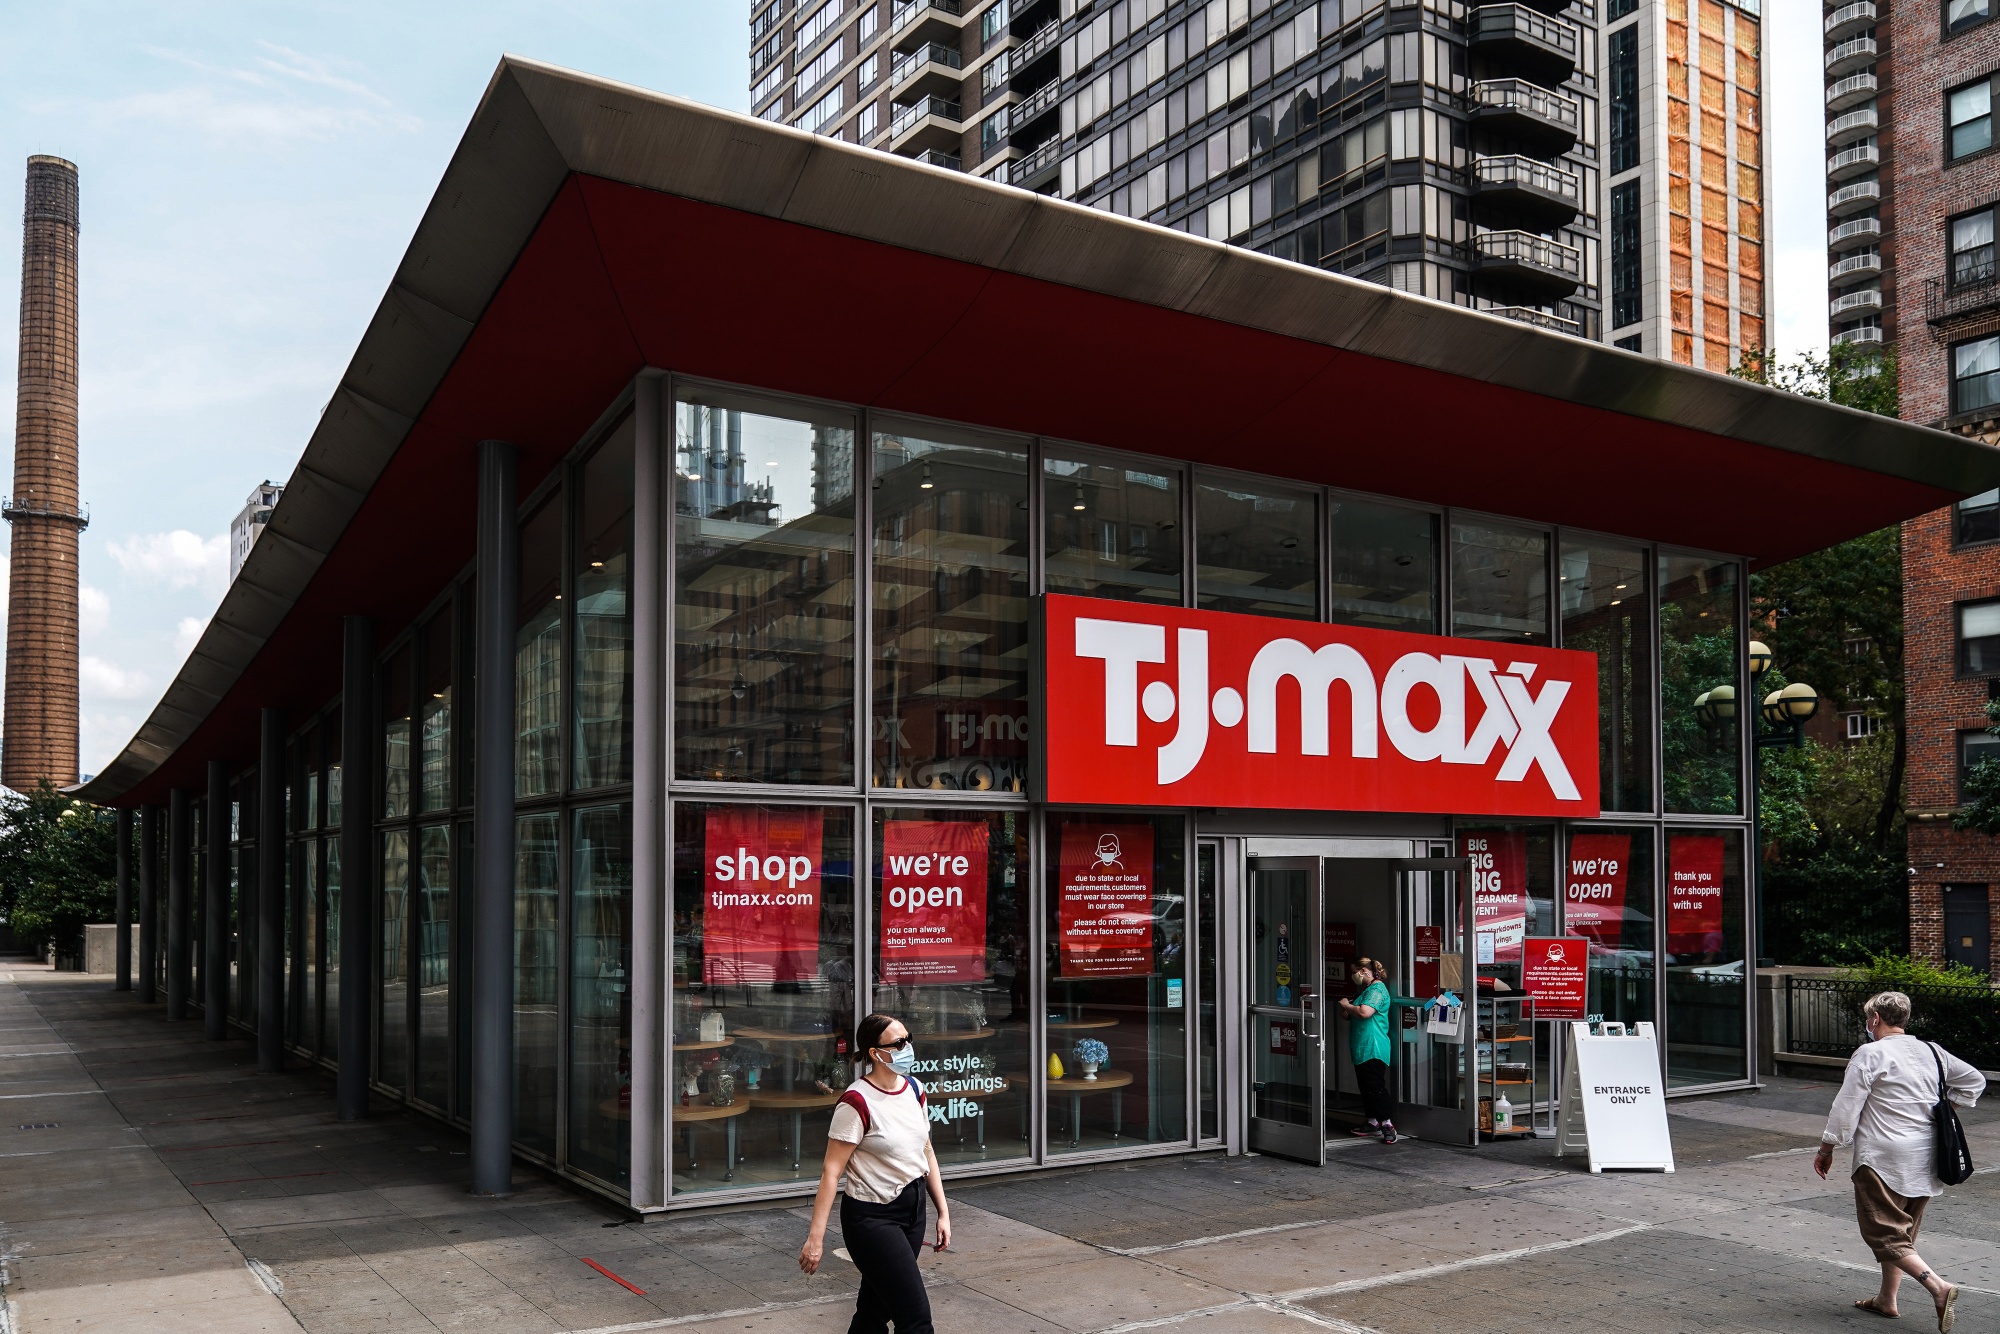 I went to the 'world's richest TJ Maxx' - it sells items from